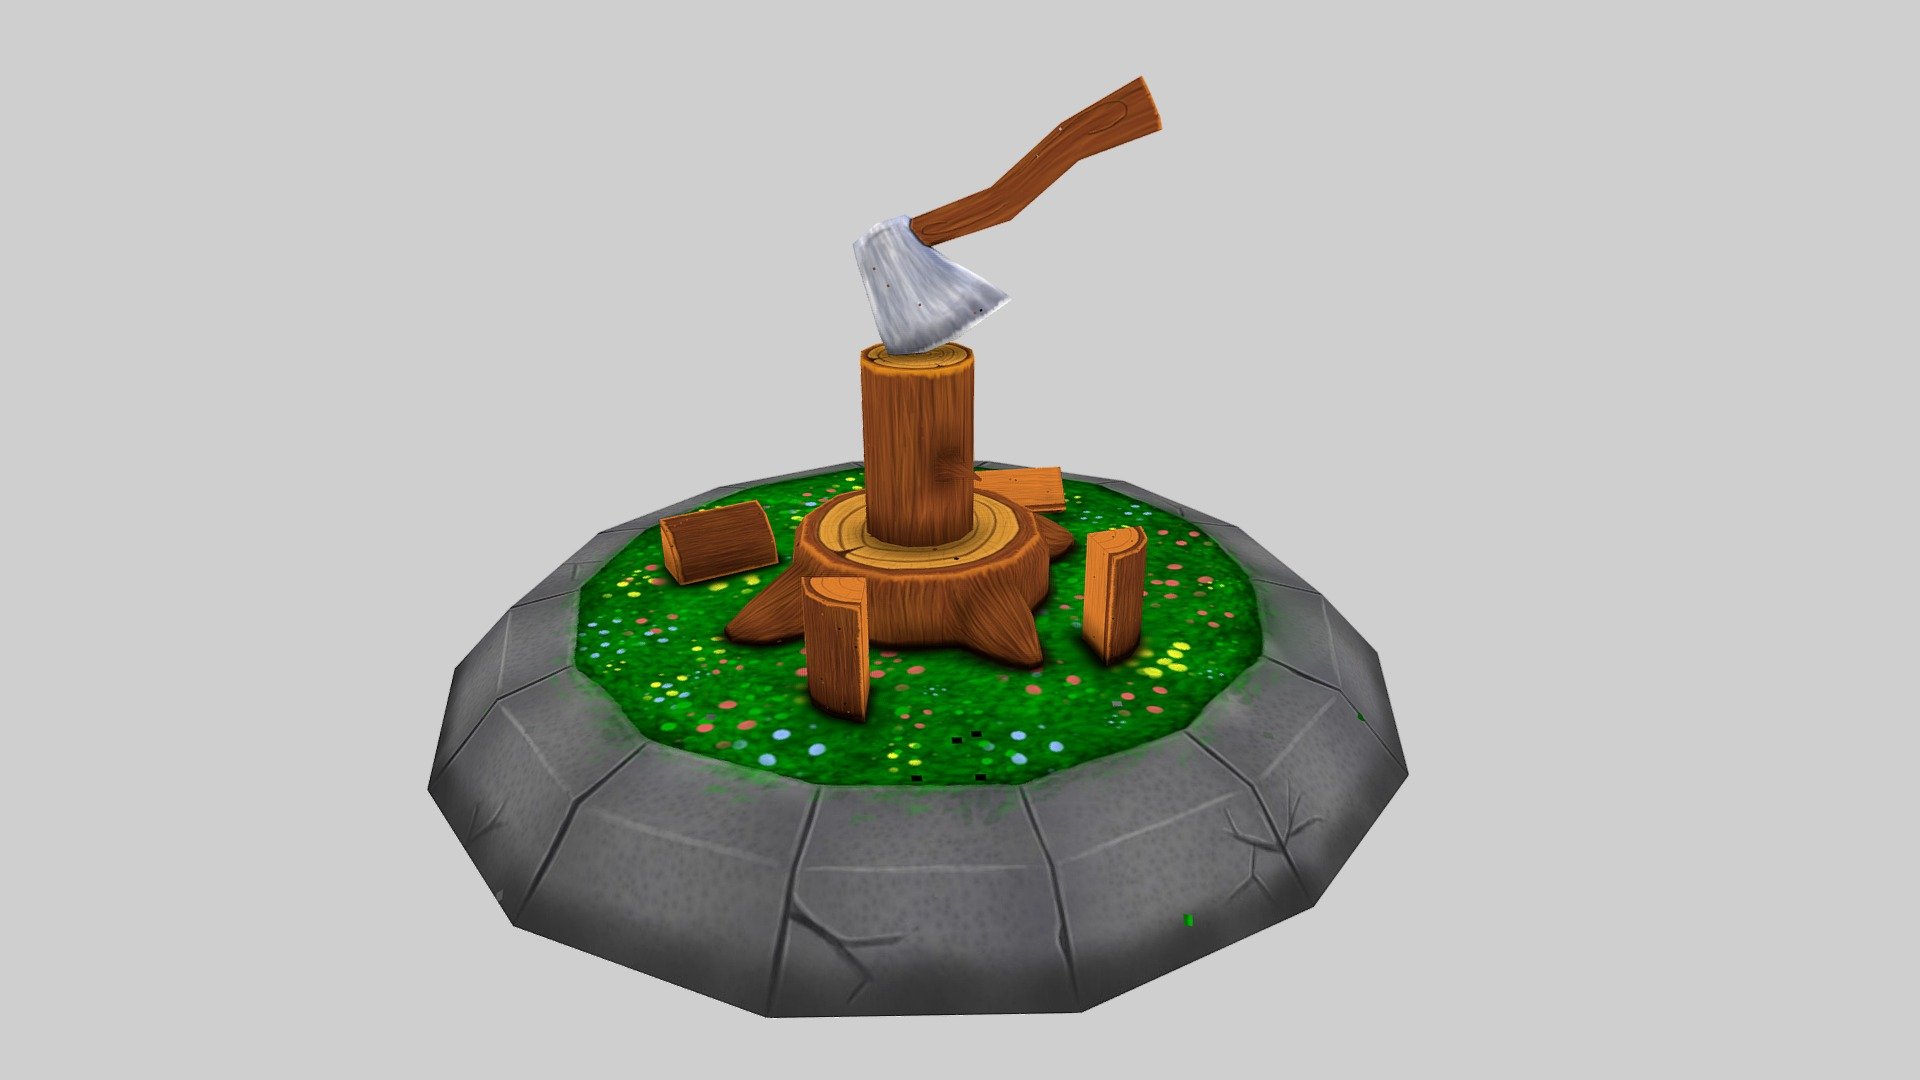 Low Poly model cutting firewood for the stove, the fireplace, ovens, I wanted it to look like a trophy, for those people who still carry out the work of cutting firewood at this time, using this traditional tool called Axe 3d model